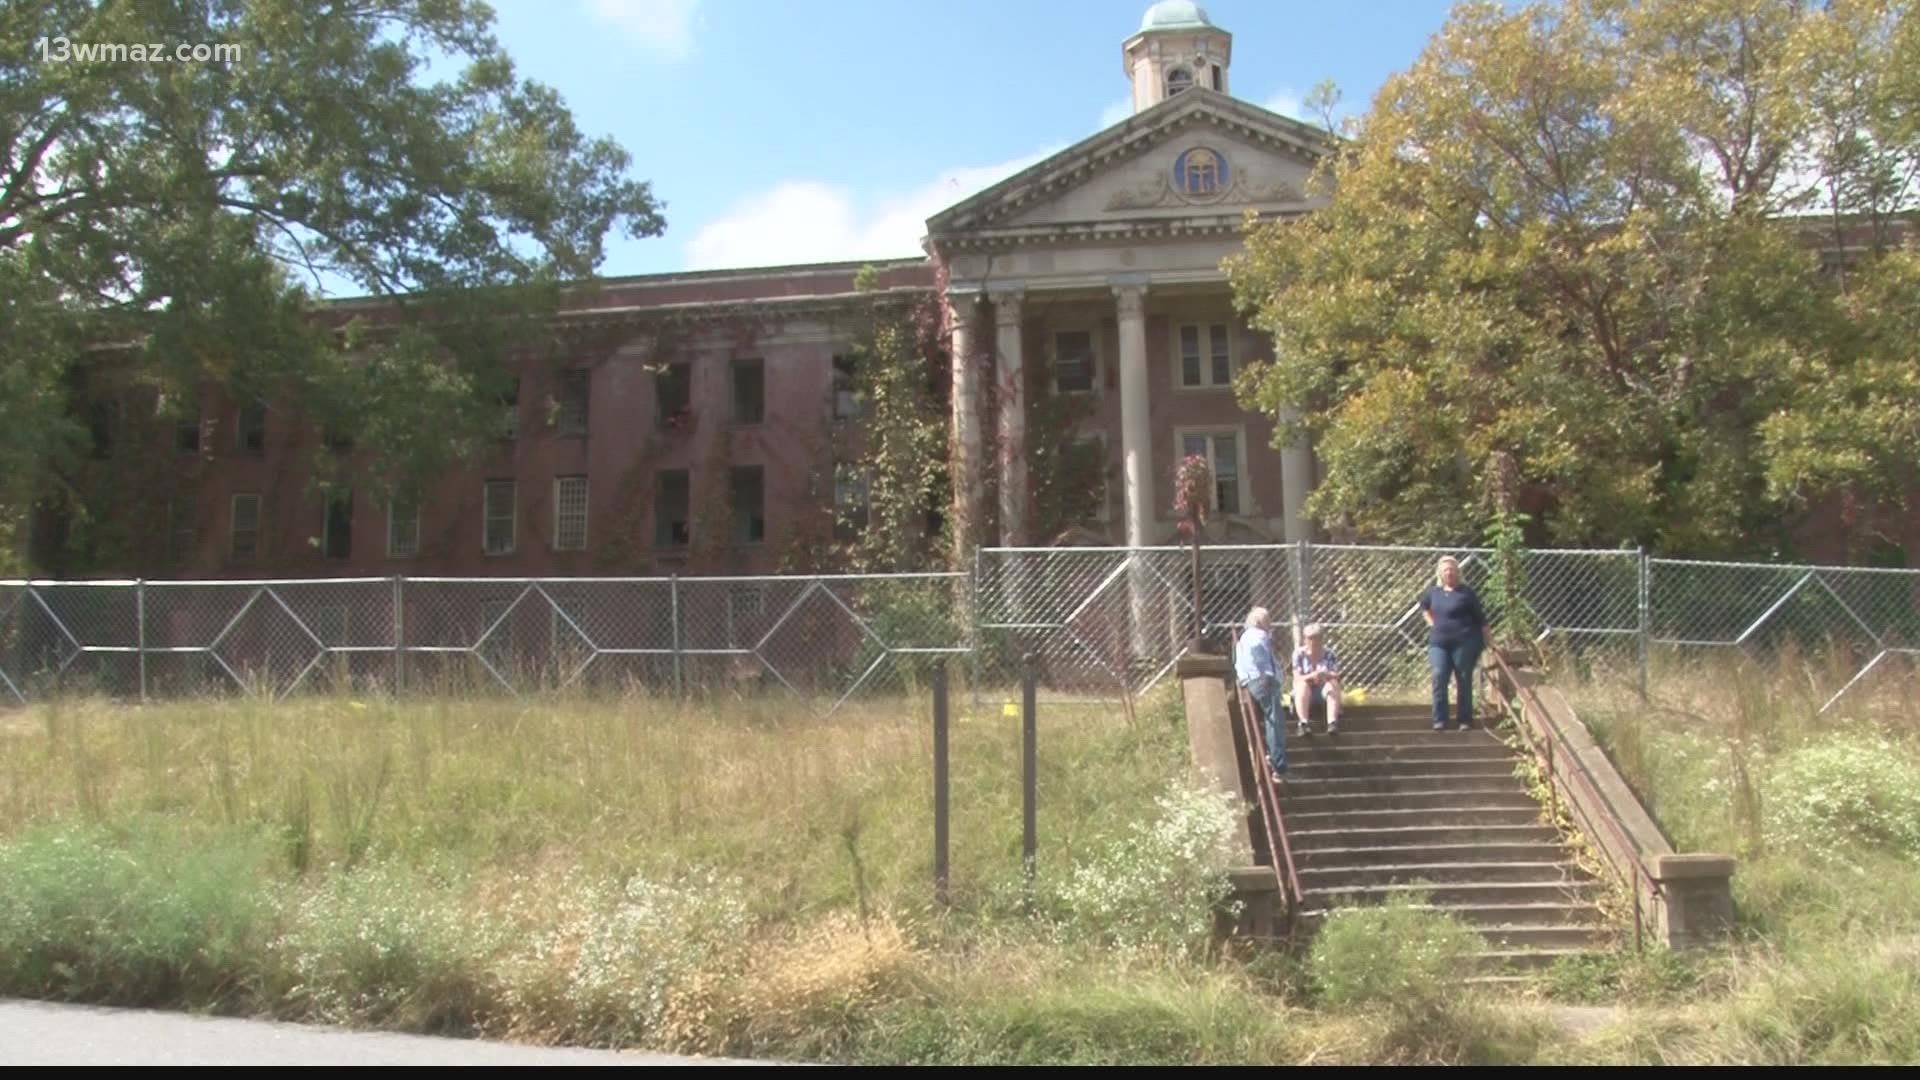 A state agency has installed fences around several buildings on Central State's campus to remove asbestos, but folks are concerned it's a sign for something bigger.